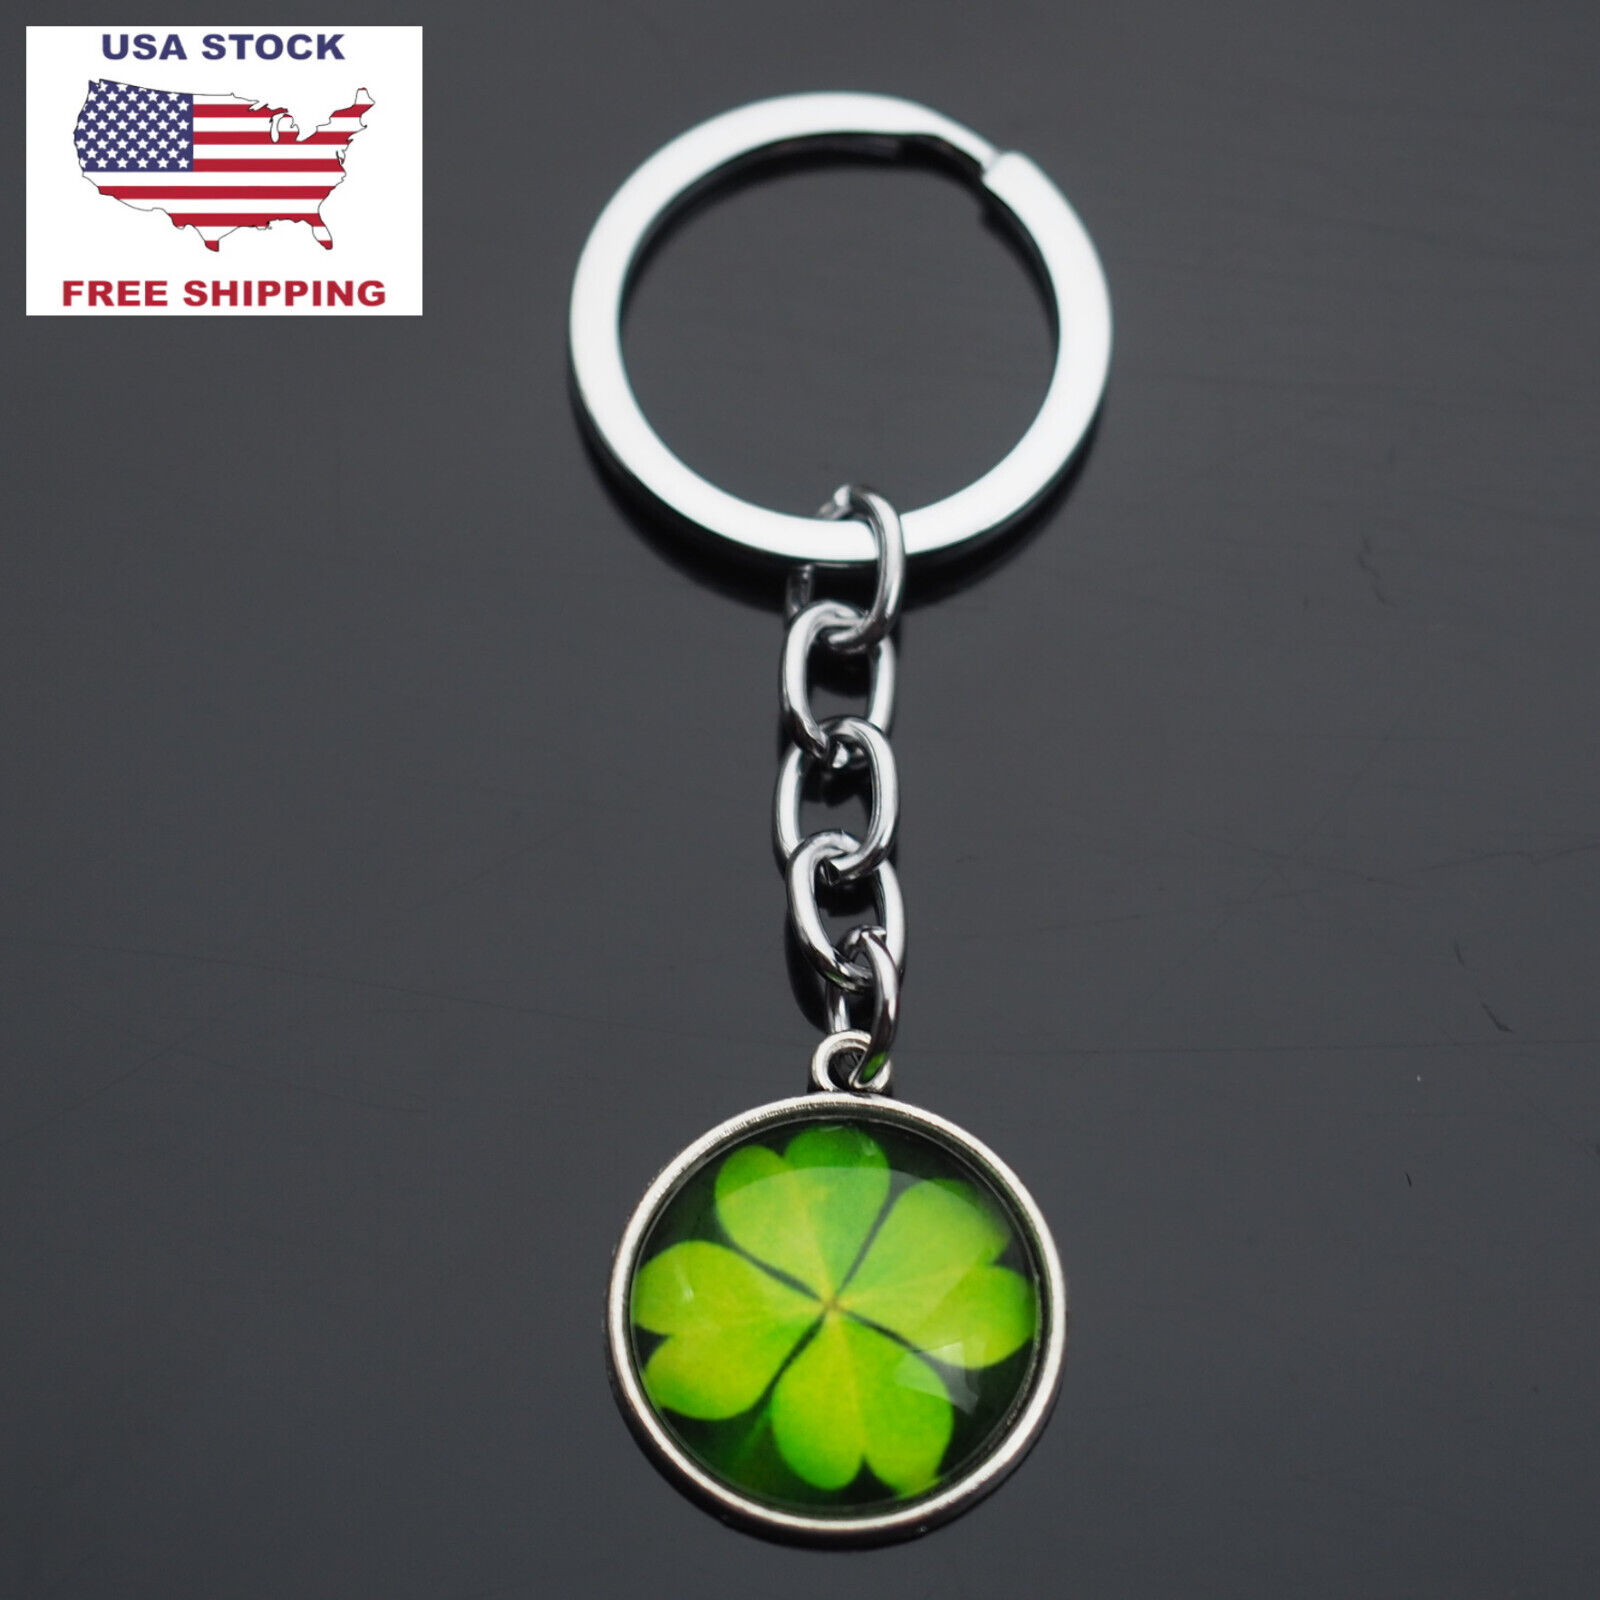 1PC Four 4 Leaf Clover Picture Glass Dome Cabochon Lucky Keychain Key Chain Ring